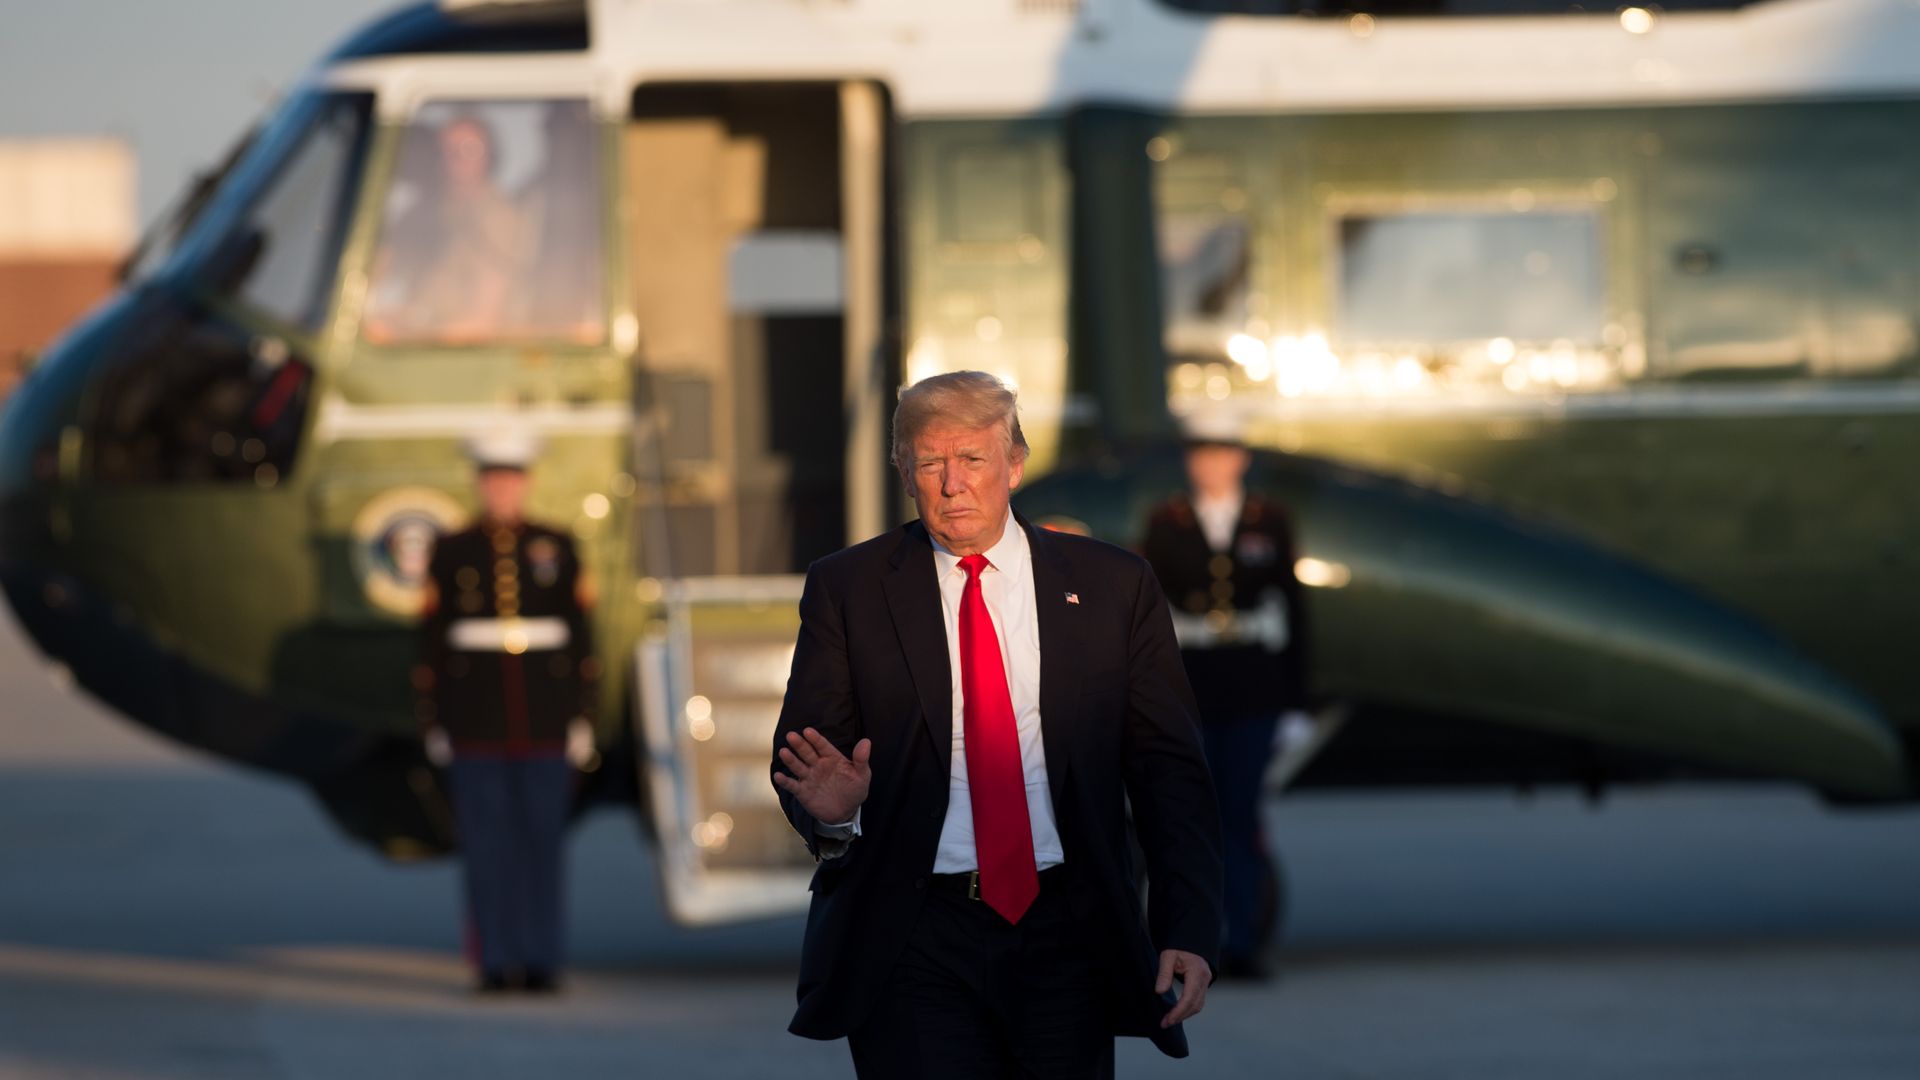 President Trump walking away from a helicopter with his right hand raised, wearing a red tie and a dark suit